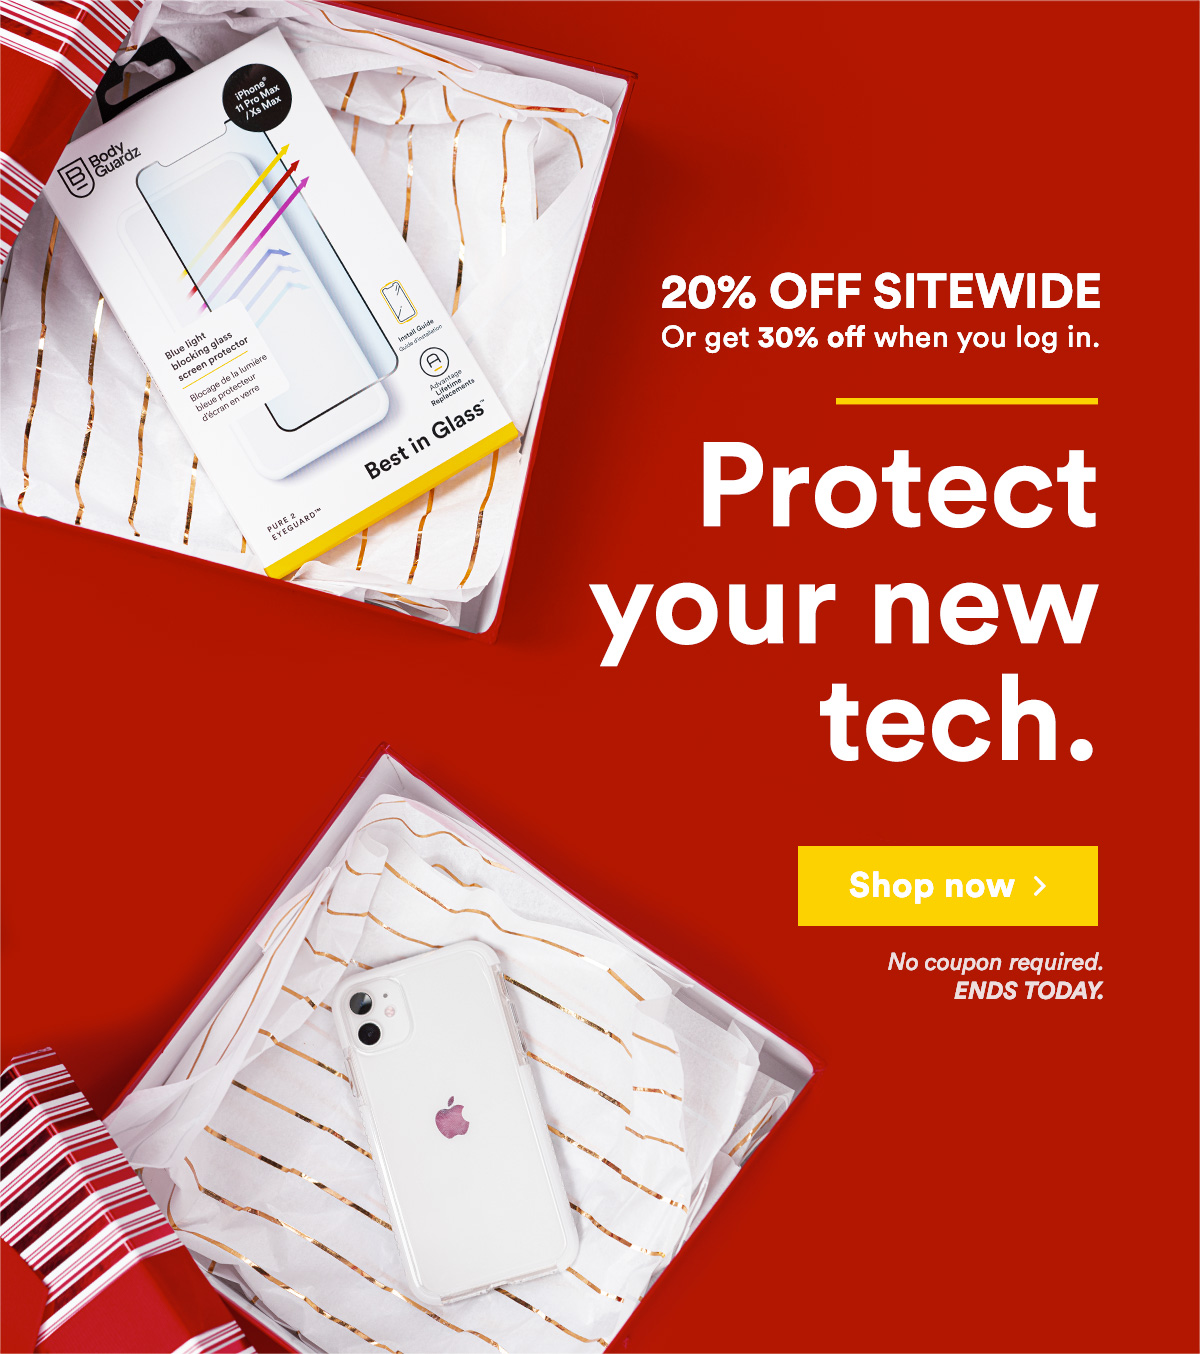 Protect Your New Tech!